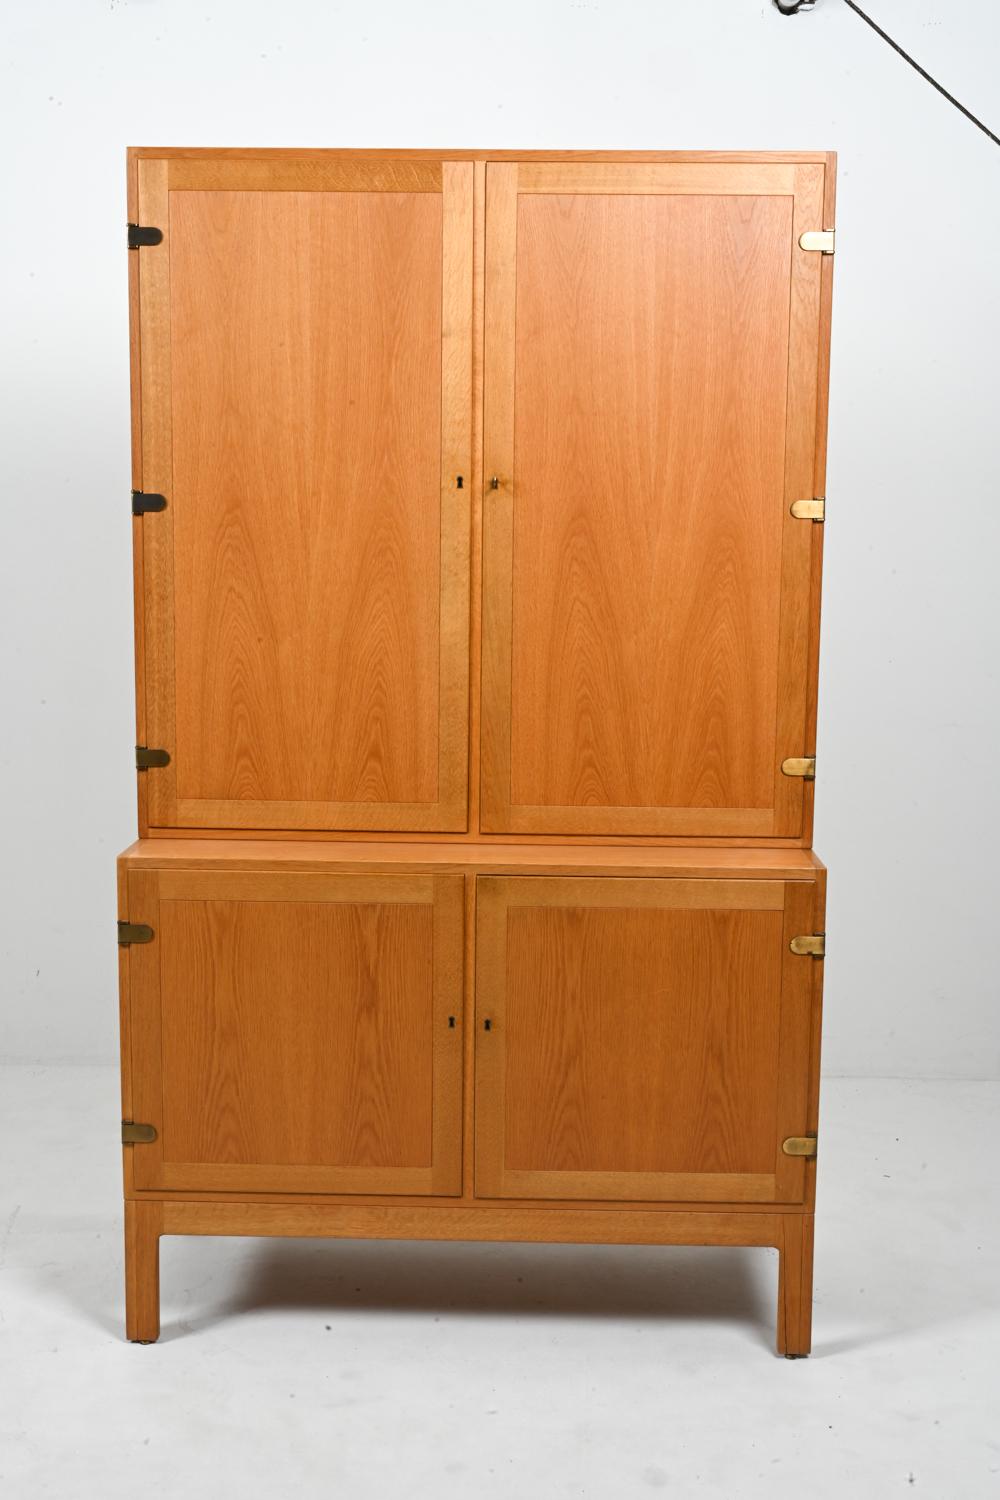 Borge Mogensen Oak bookcase with Cabinet Doors In Good Condition For Sale In Norwalk, CT